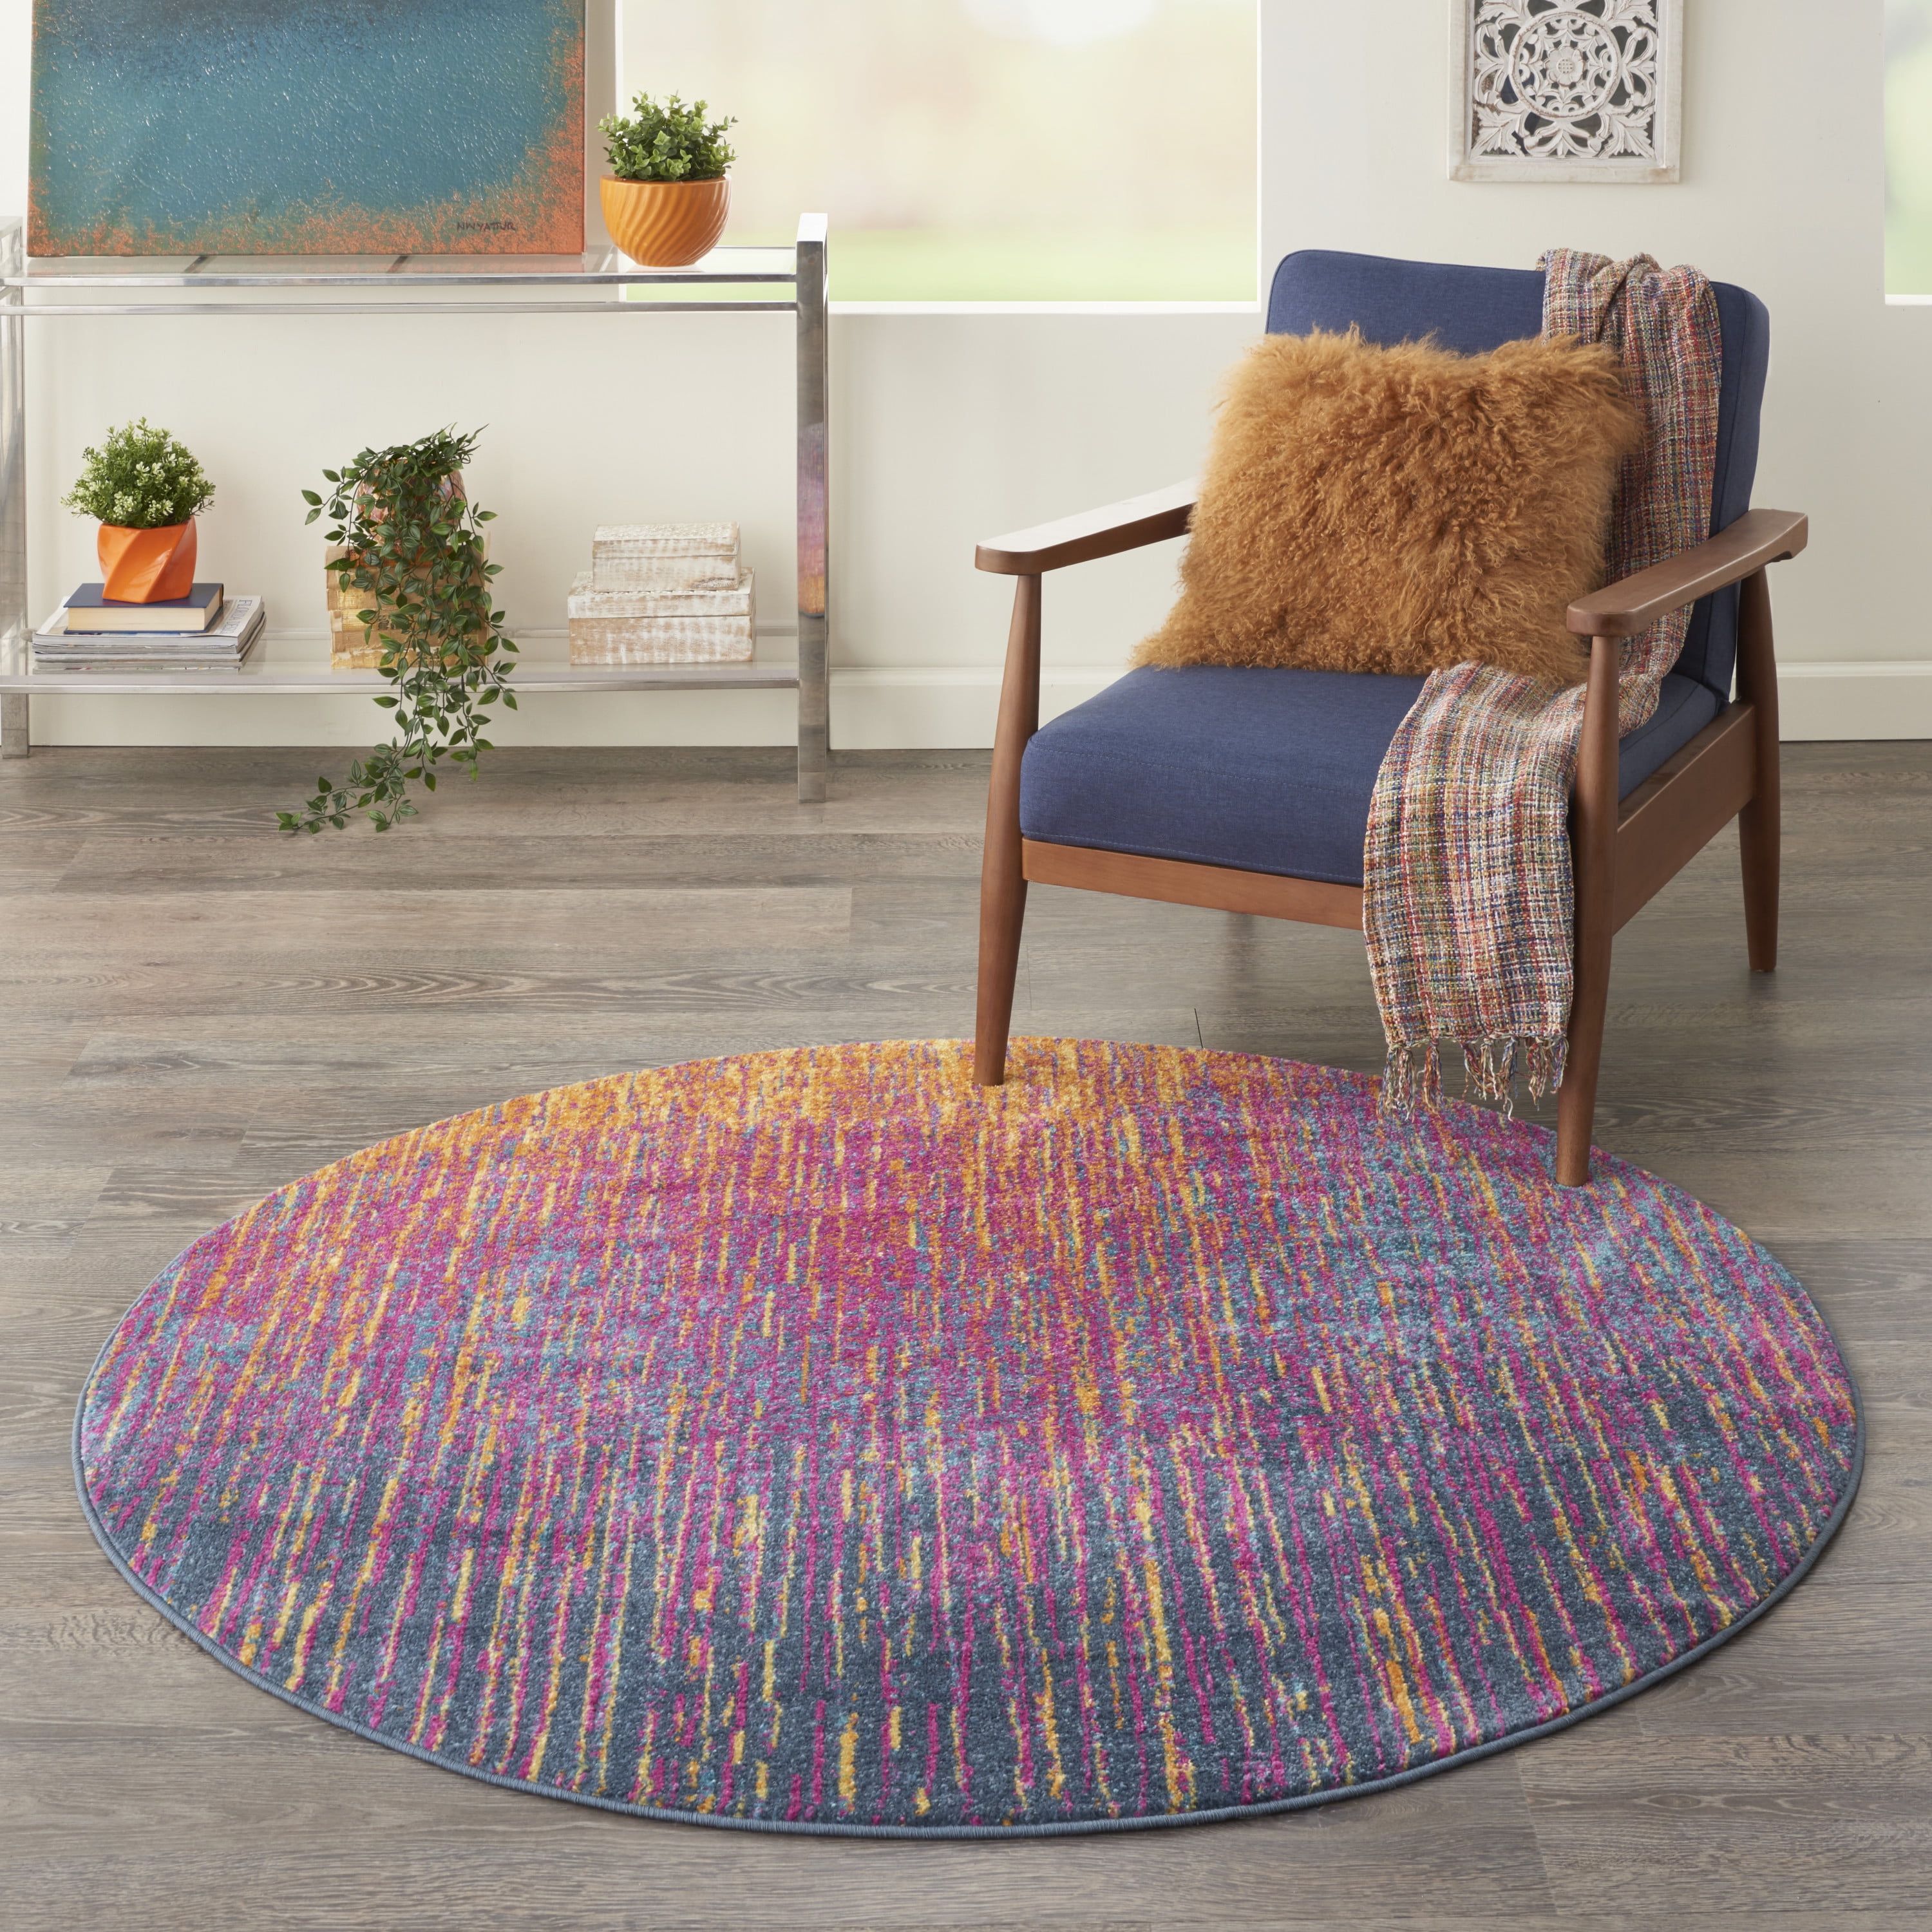 5' Round Nourison Passion Transitional Bohemian Teal Multicolor 5'3 x ROUND Area Rug, 